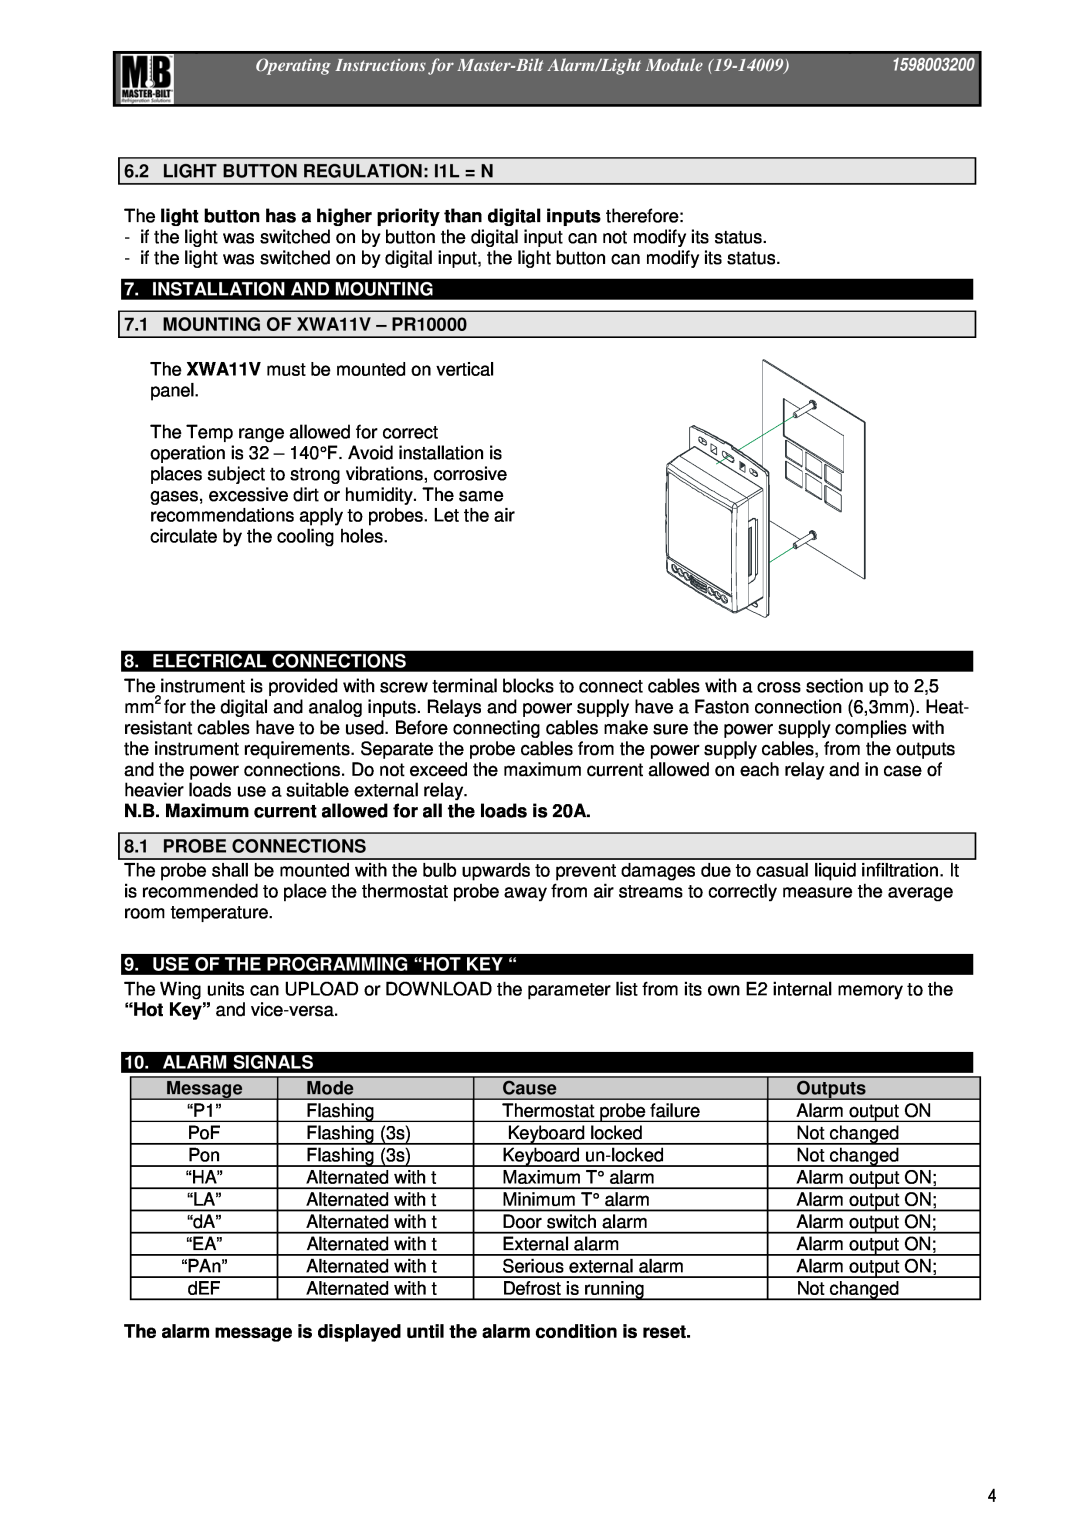 Master Bilt 19-14009 LIGHT BUTTON REGULATION I1L = N, Electrical Connections, Probe Connections, Alarm Signals, Message 